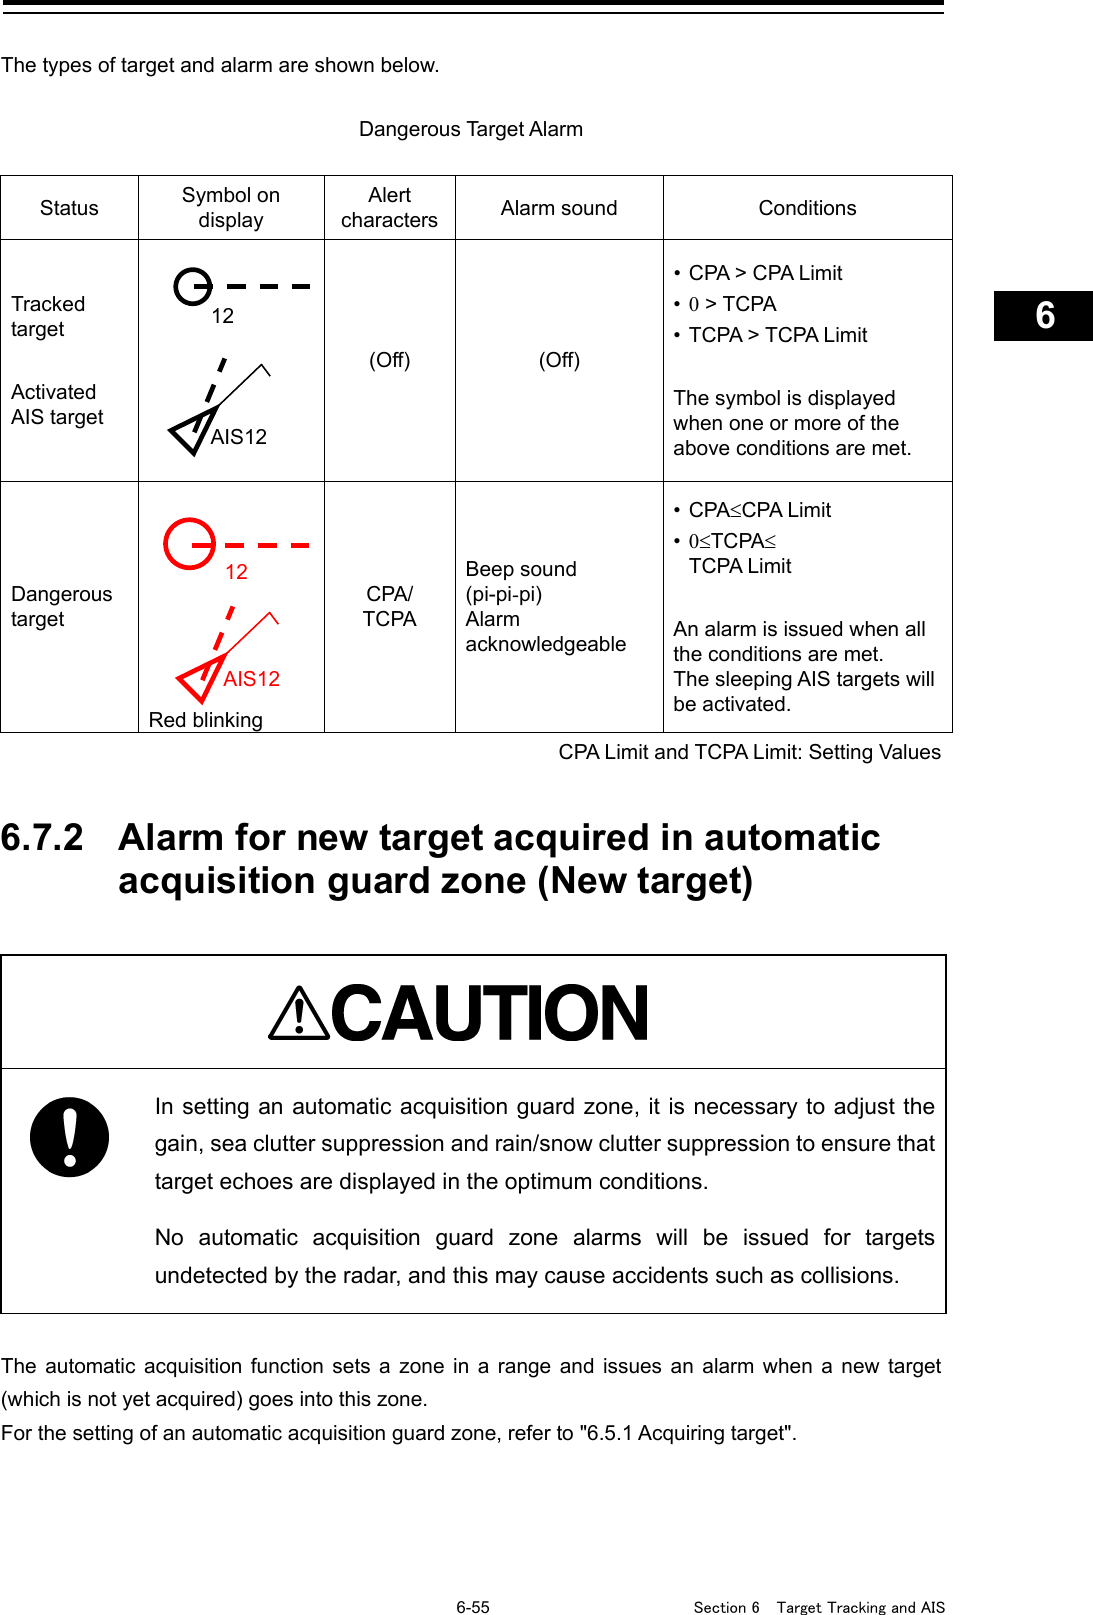   6-55  Section 6  Target Tracking and AIS    1  2  3  4  5  6  7  8  9  10  11  12  13  14  15  16  17  18  19  20  21  22  23  24  25  26  27      The types of target and alarm are shown below.  Dangerous Target Alarm  Status Symbol on display Alert characters Alarm sound Conditions Tracked target  Activated AIS target    (Off) (Off) • CPA &gt; CPA Limit • 0 &gt; TCPA • TCPA &gt; TCPA Limit  The symbol is displayed when one or more of the above conditions are met. Dangerous target    Red blinking CPA/ TCPA Beep sound (pi-pi-pi) Alarm acknowledgeable  • CPA≤CPA Limit • 0≤TCPA≤ TCPA Limit  An alarm is issued when all the conditions are met. The sleeping AIS targets will be activated. CPA Limit and TCPA Limit: Setting Values   6.7.2 Alarm for new target acquired in automatic acquisition guard zone (New target)    In setting an automatic acquisition guard zone, it is necessary to adjust the gain, sea clutter suppression and rain/snow clutter suppression to ensure that target echoes are displayed in the optimum conditions.   No  automatic acquisition guard zone alarms will be issued for targets undetected by the radar, and this may cause accidents such as collisions.  The automatic acquisition function sets a zone in a range and issues an alarm when a new target (which is not yet acquired) goes into this zone. For the setting of an automatic acquisition guard zone, refer to &quot;6.5.1 Acquiring target&quot;.     AIS12  12 AIS12   12 